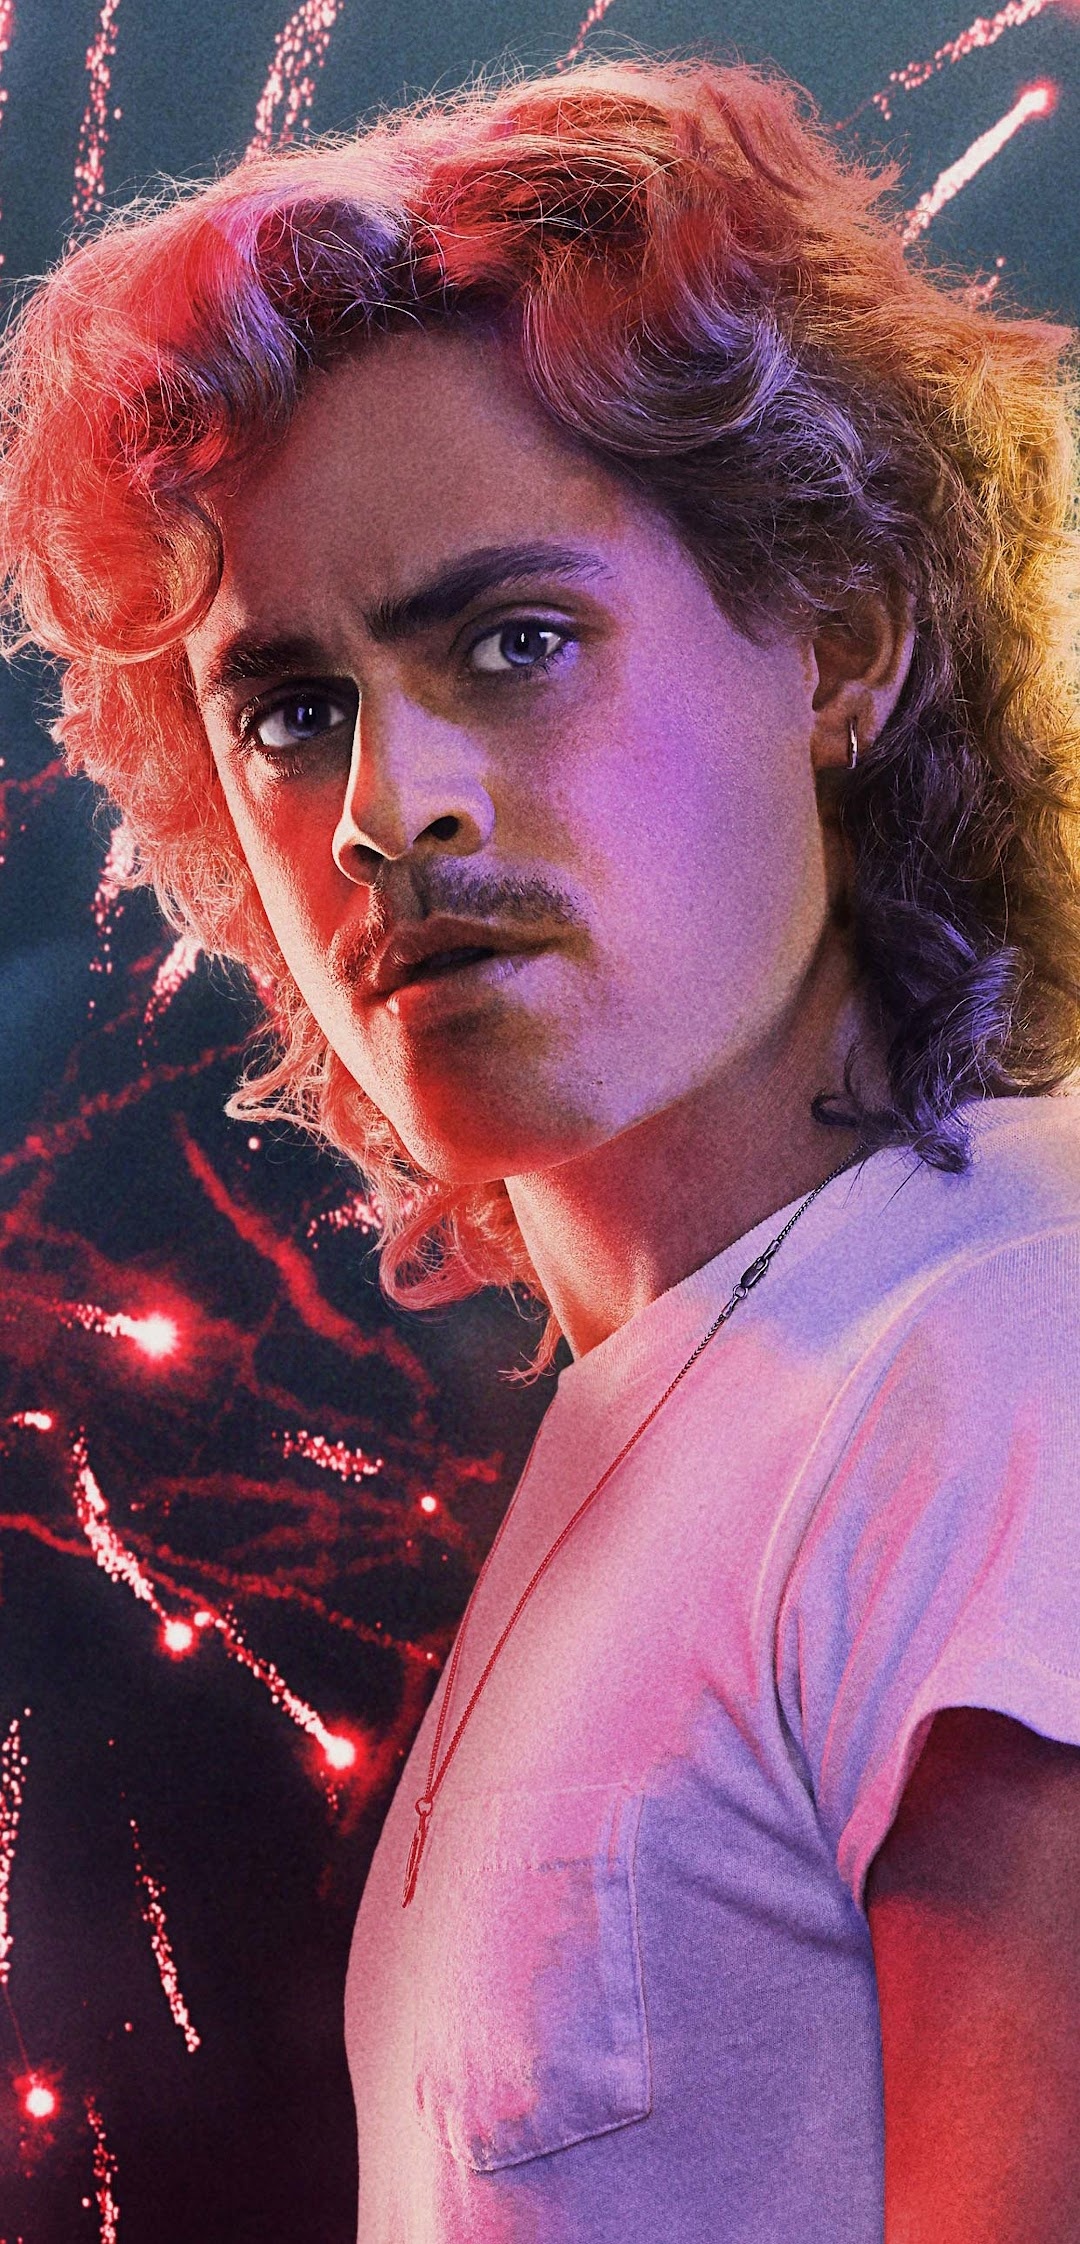 Dacre Montgomery TV shows, Stranger Things season 3, Billy Hargrove wallpaper, Ultimate clarity, 1080x2250 HD Handy